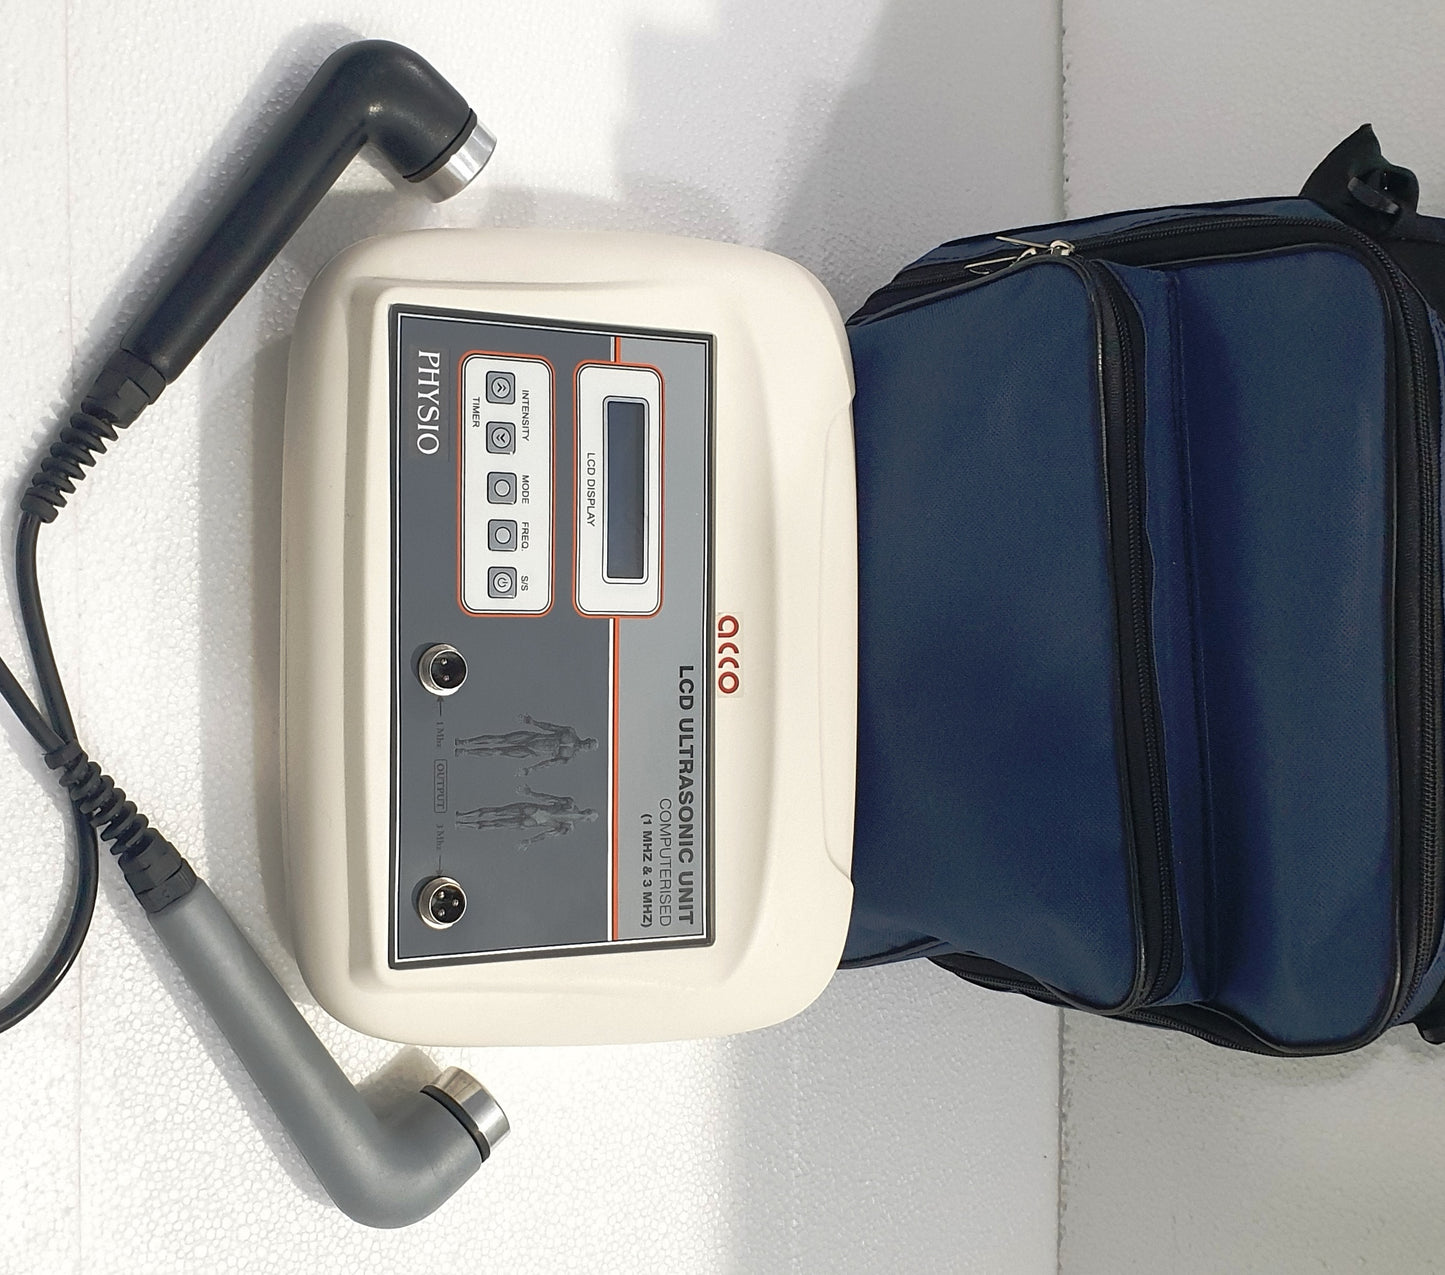 acco Ultrasound Therapy Machine 1& 3 Mhz, LCD Display - US24